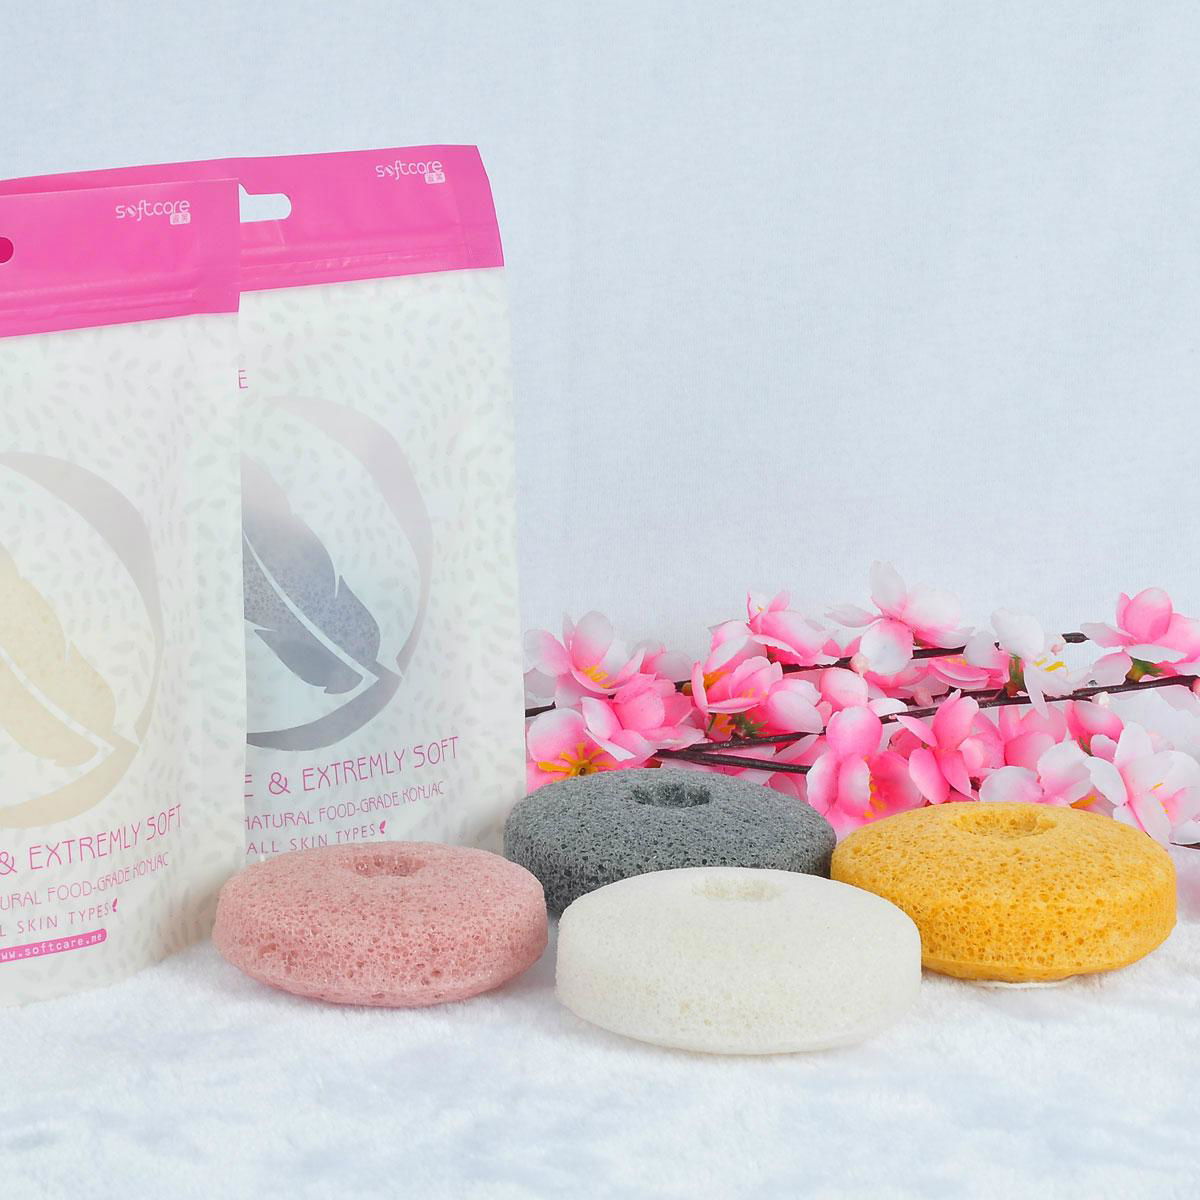 SOFTCARE round cake type 100% natural facial cleansing konjac sponge 4